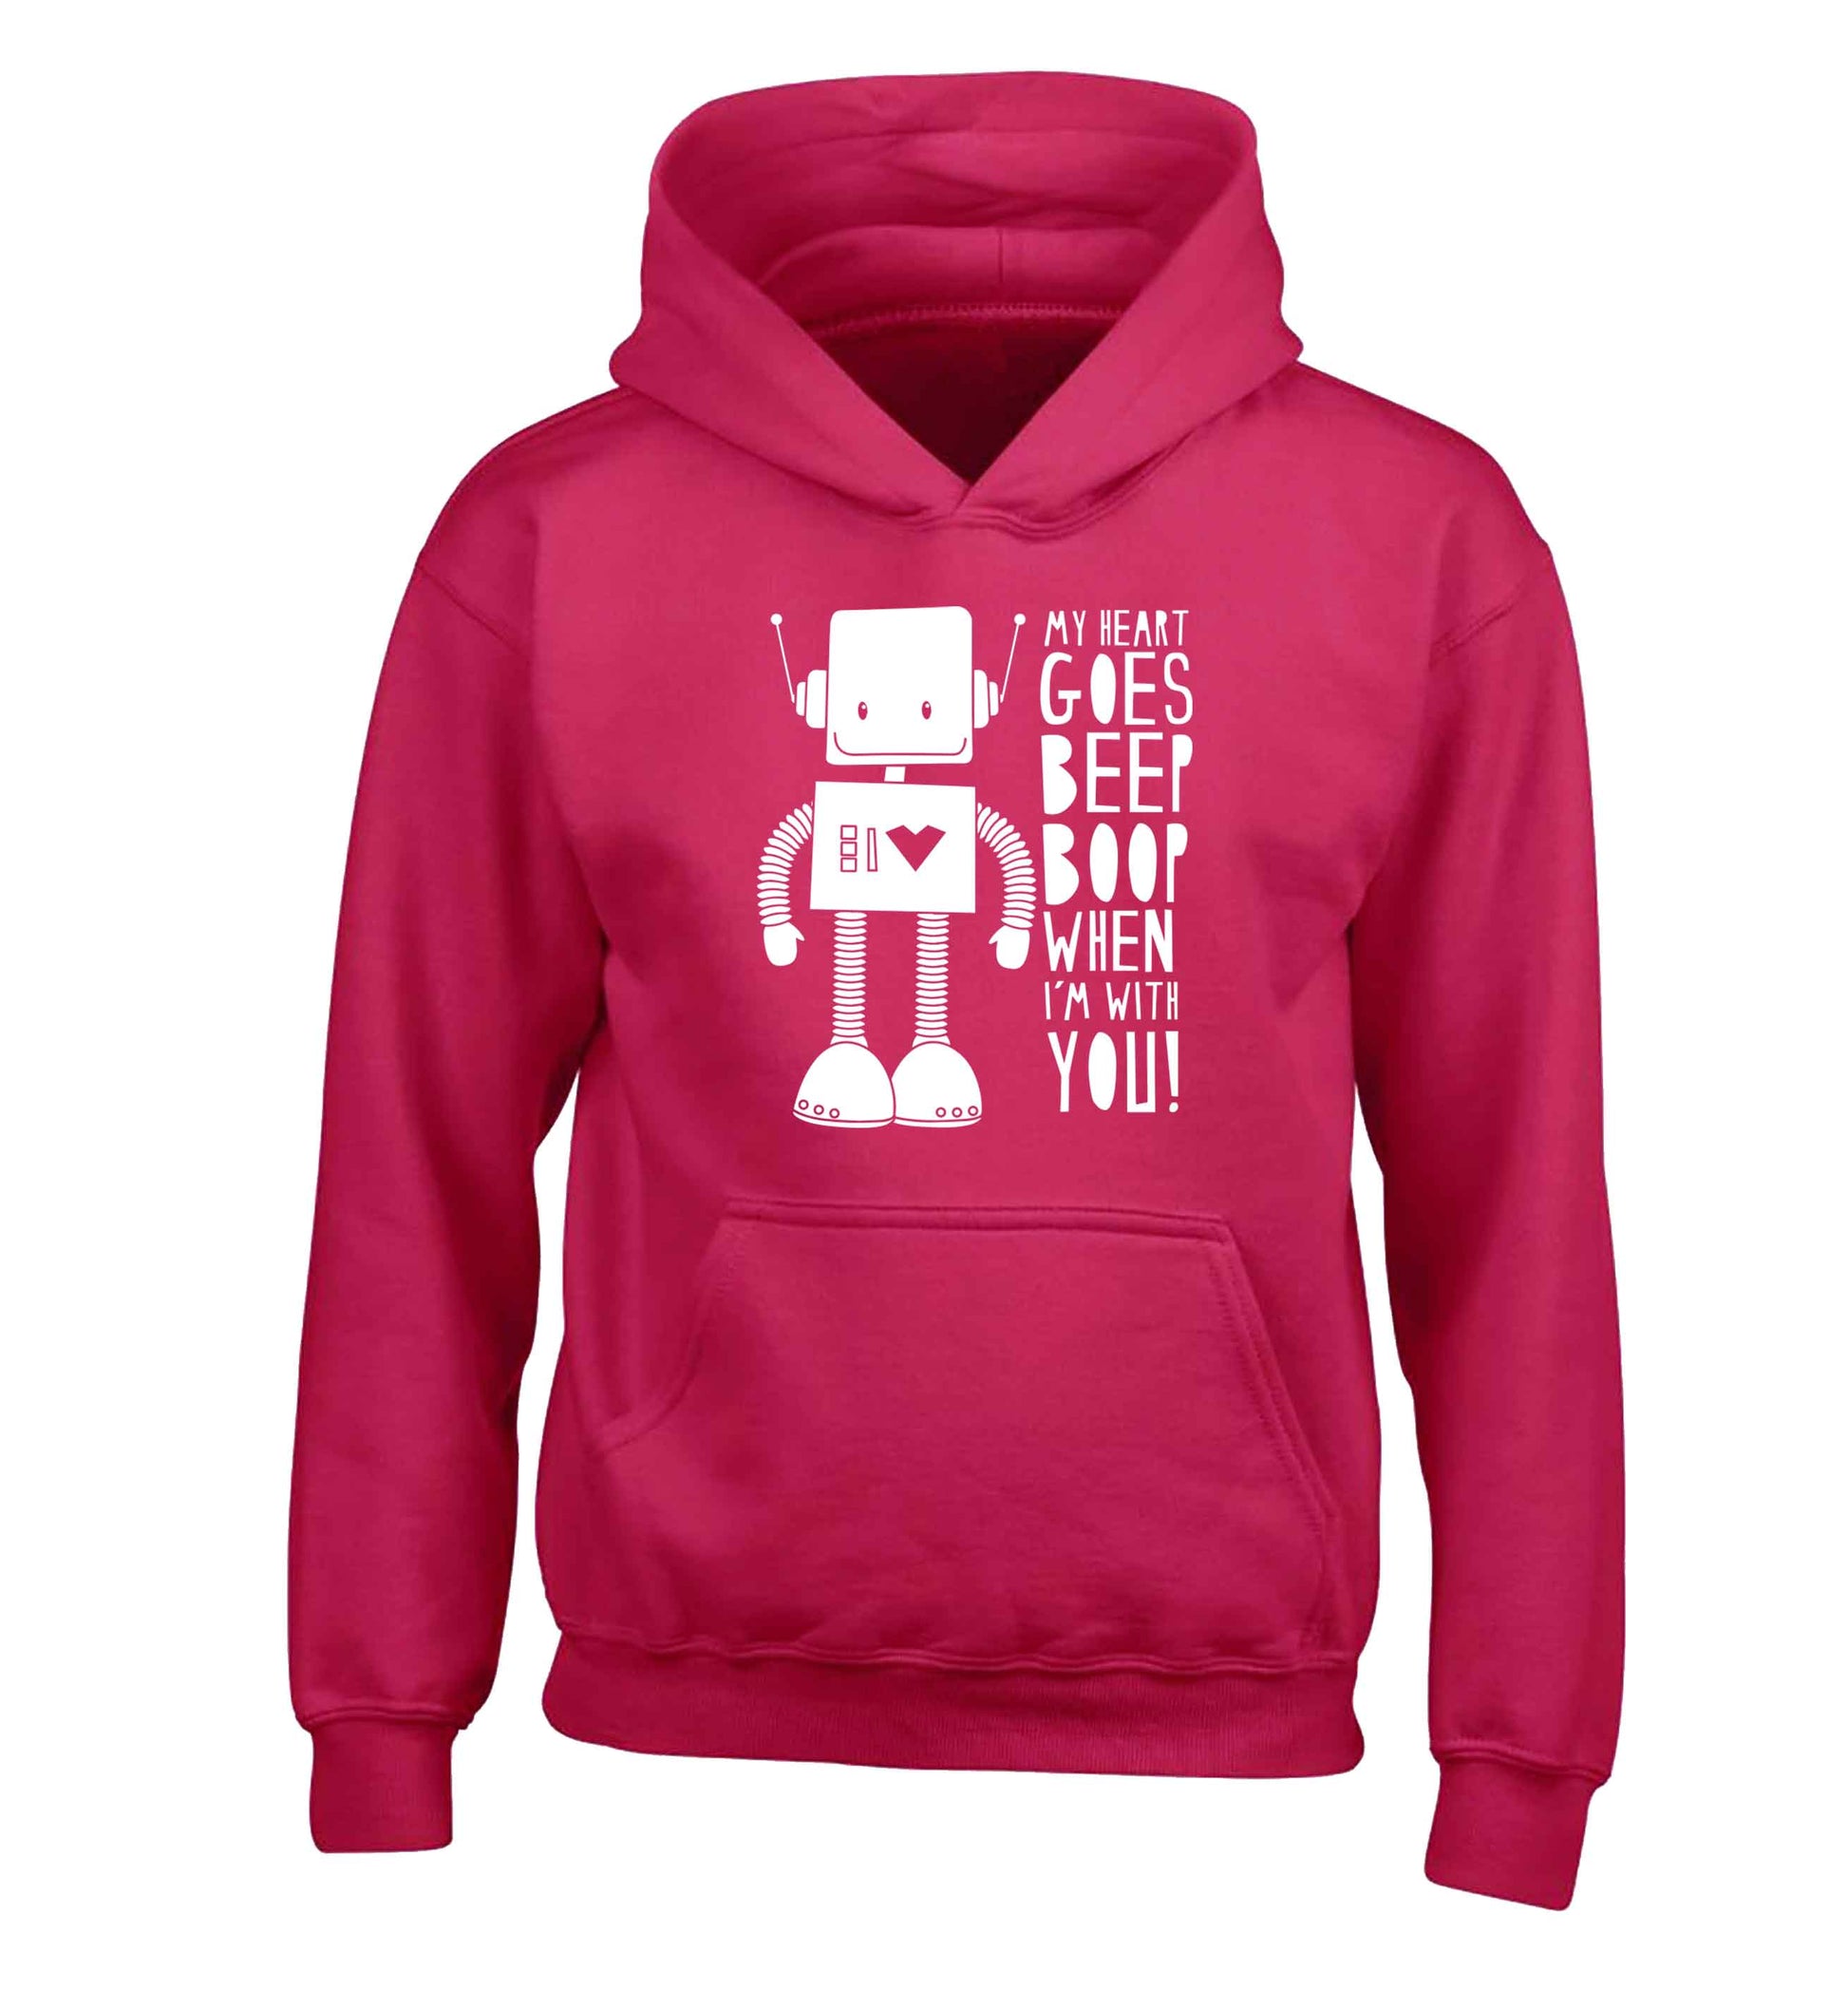 My heart goes beep boop when I'm with you children's pink hoodie 12-13 Years